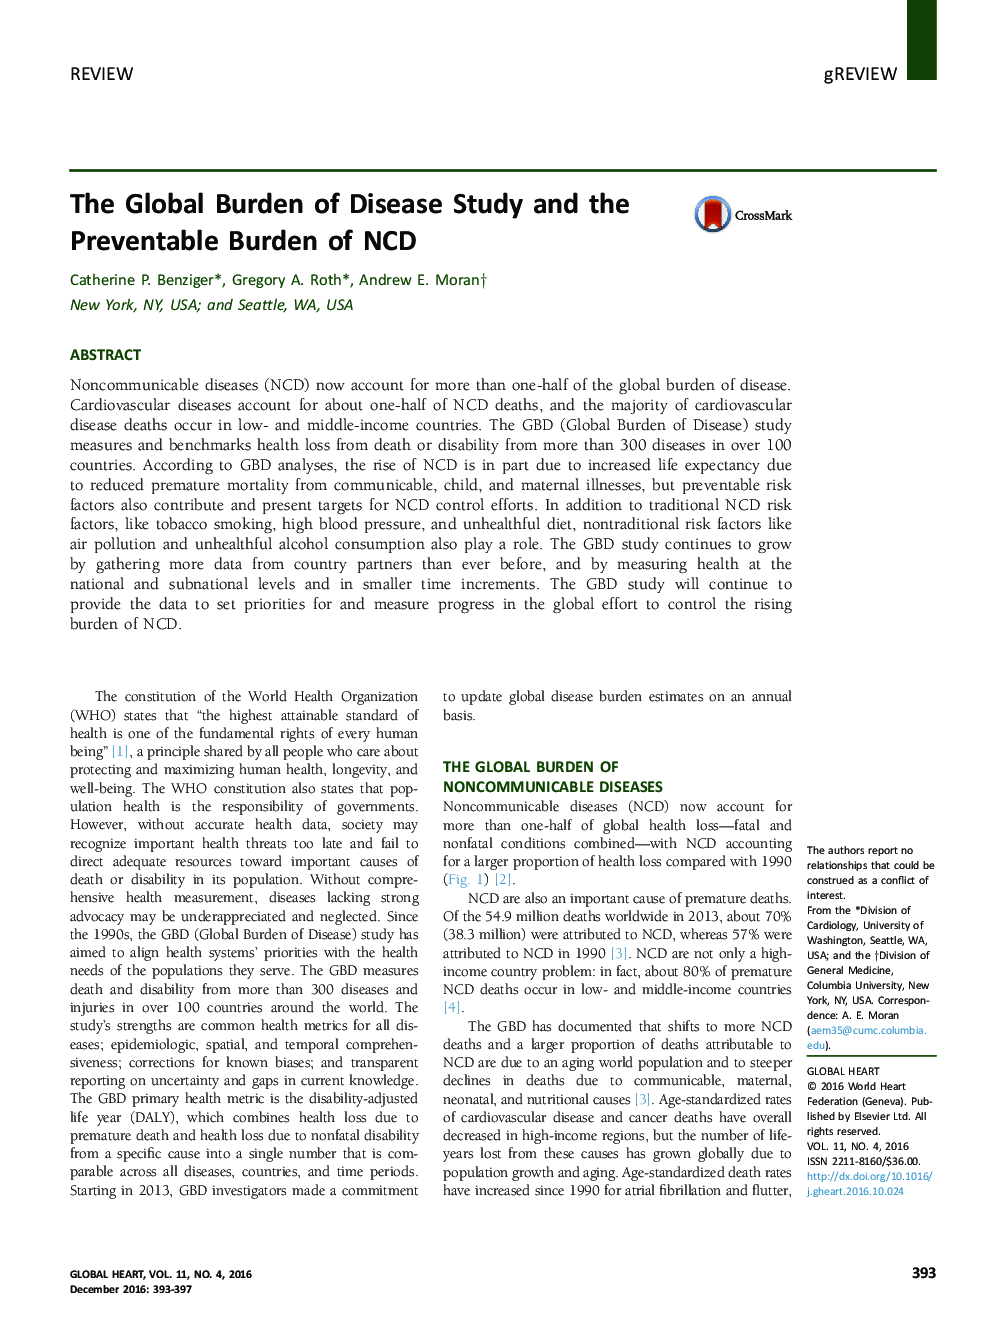 The Global Burden of Disease Study and the Preventable Burden of NCD